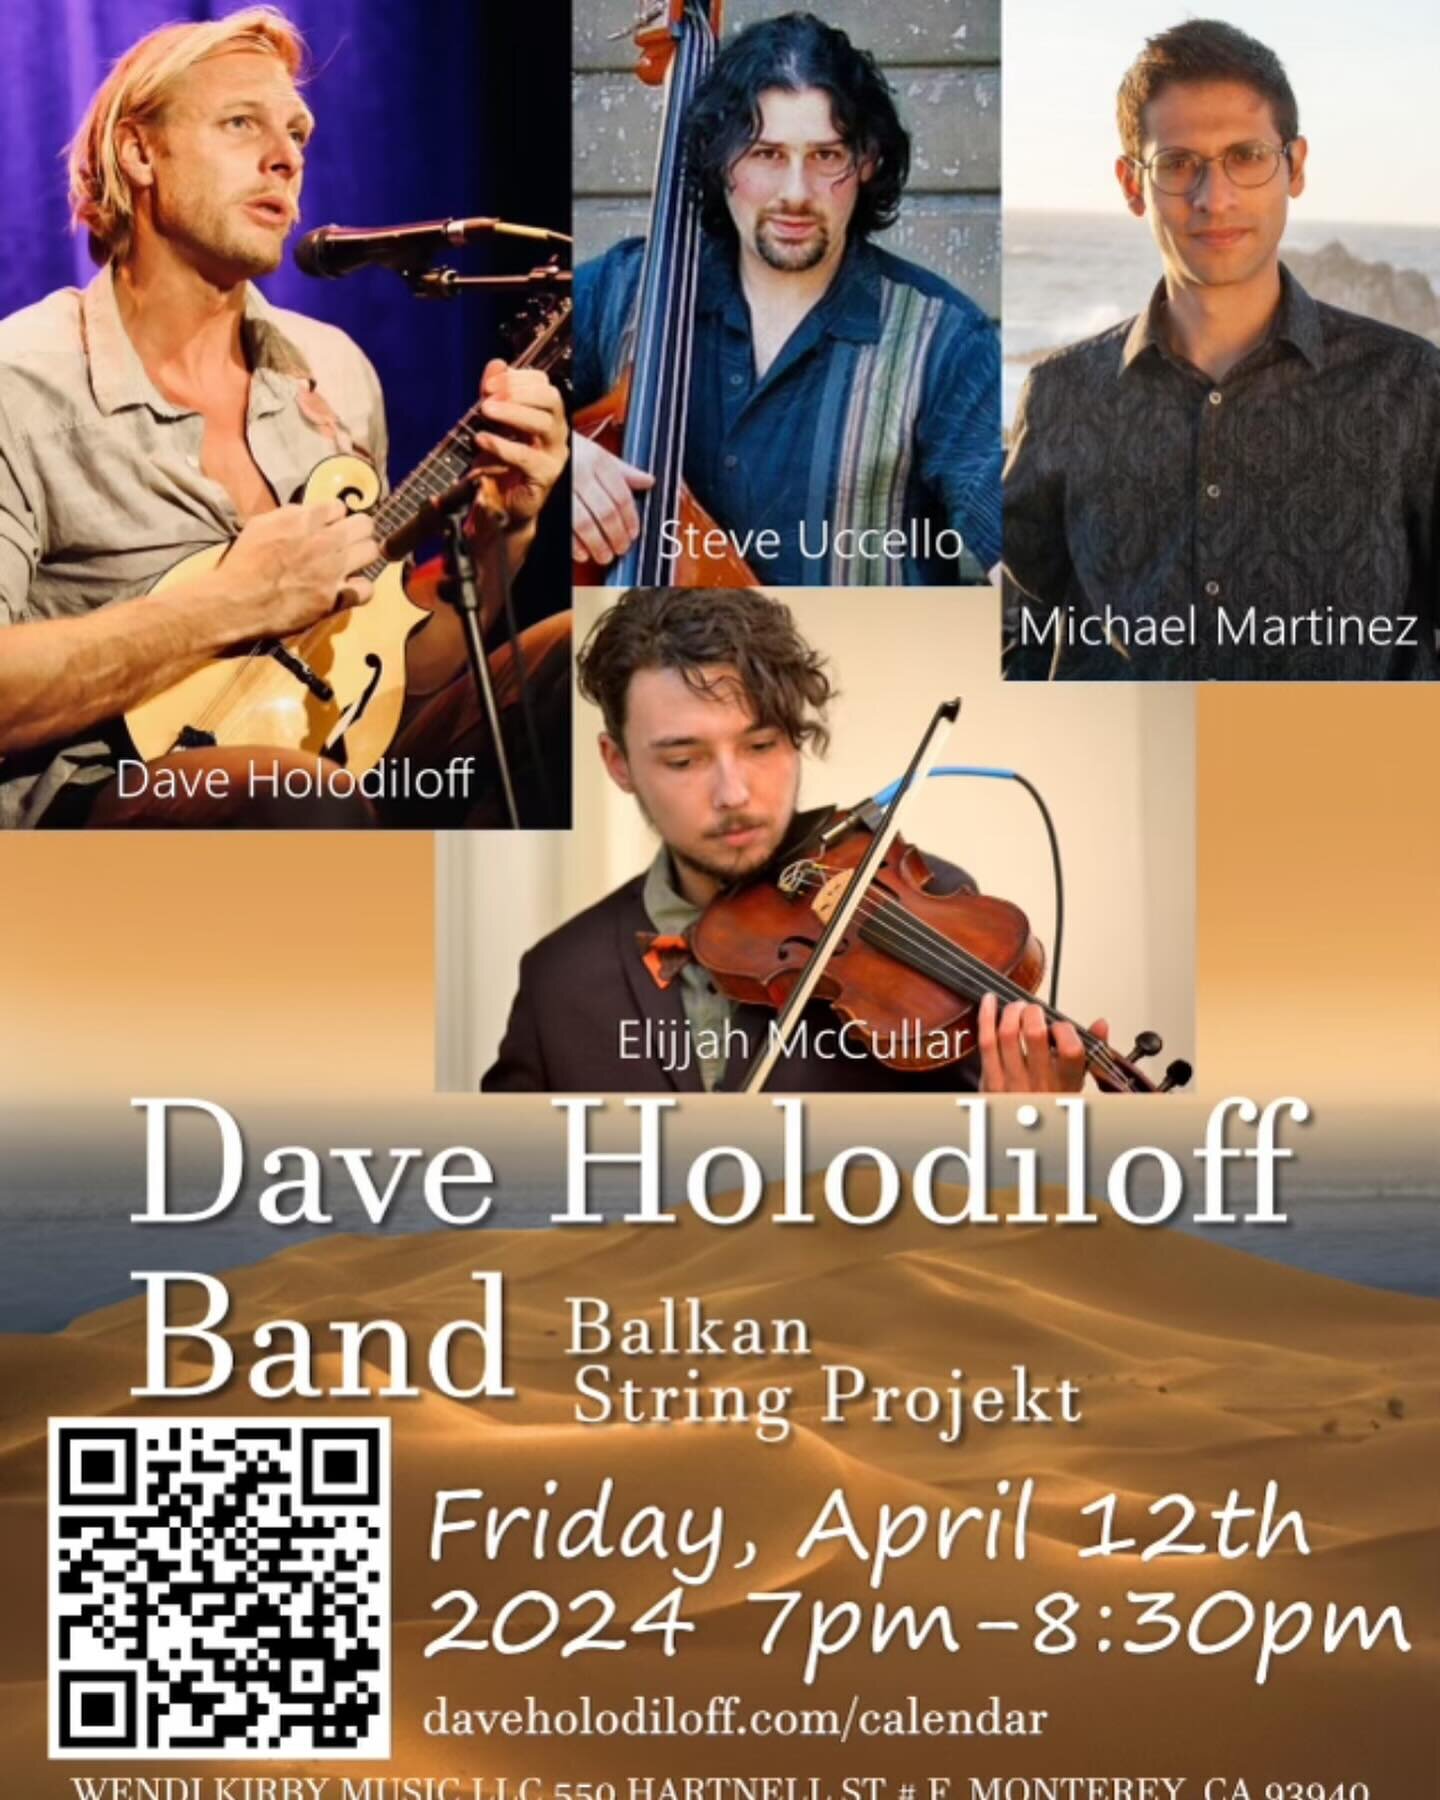 Can&rsquo;t wait for this performance Friday April 12  @wendikirbymusic Tickets at Wendi Kirby Music -link in bio.  Click concerts and events! Don&rsquo;t miss it!! #daveholodiloff #livemusicmonterey #oldmonterey #krml #livemusiccarmel #wendikirbymus